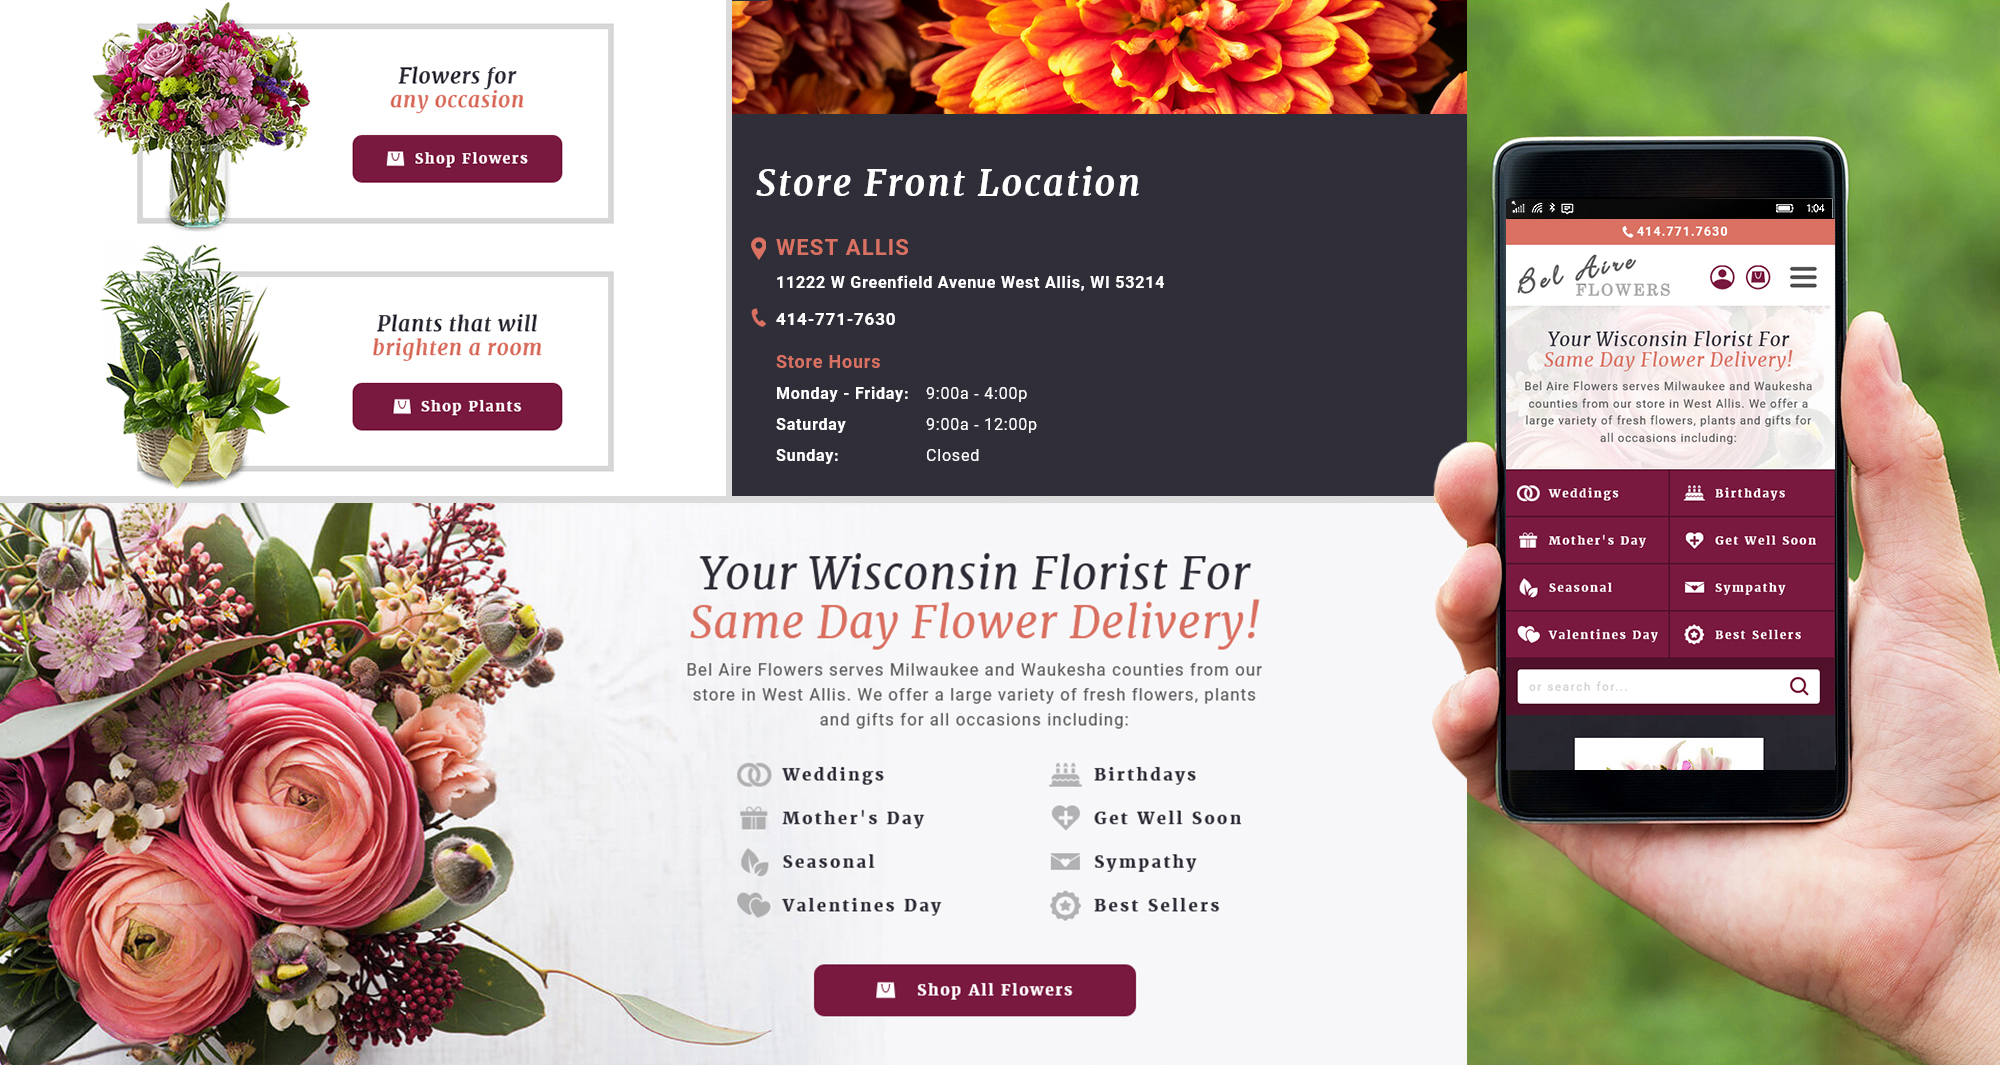 Milwaukee web marketing for Belaire FLowers